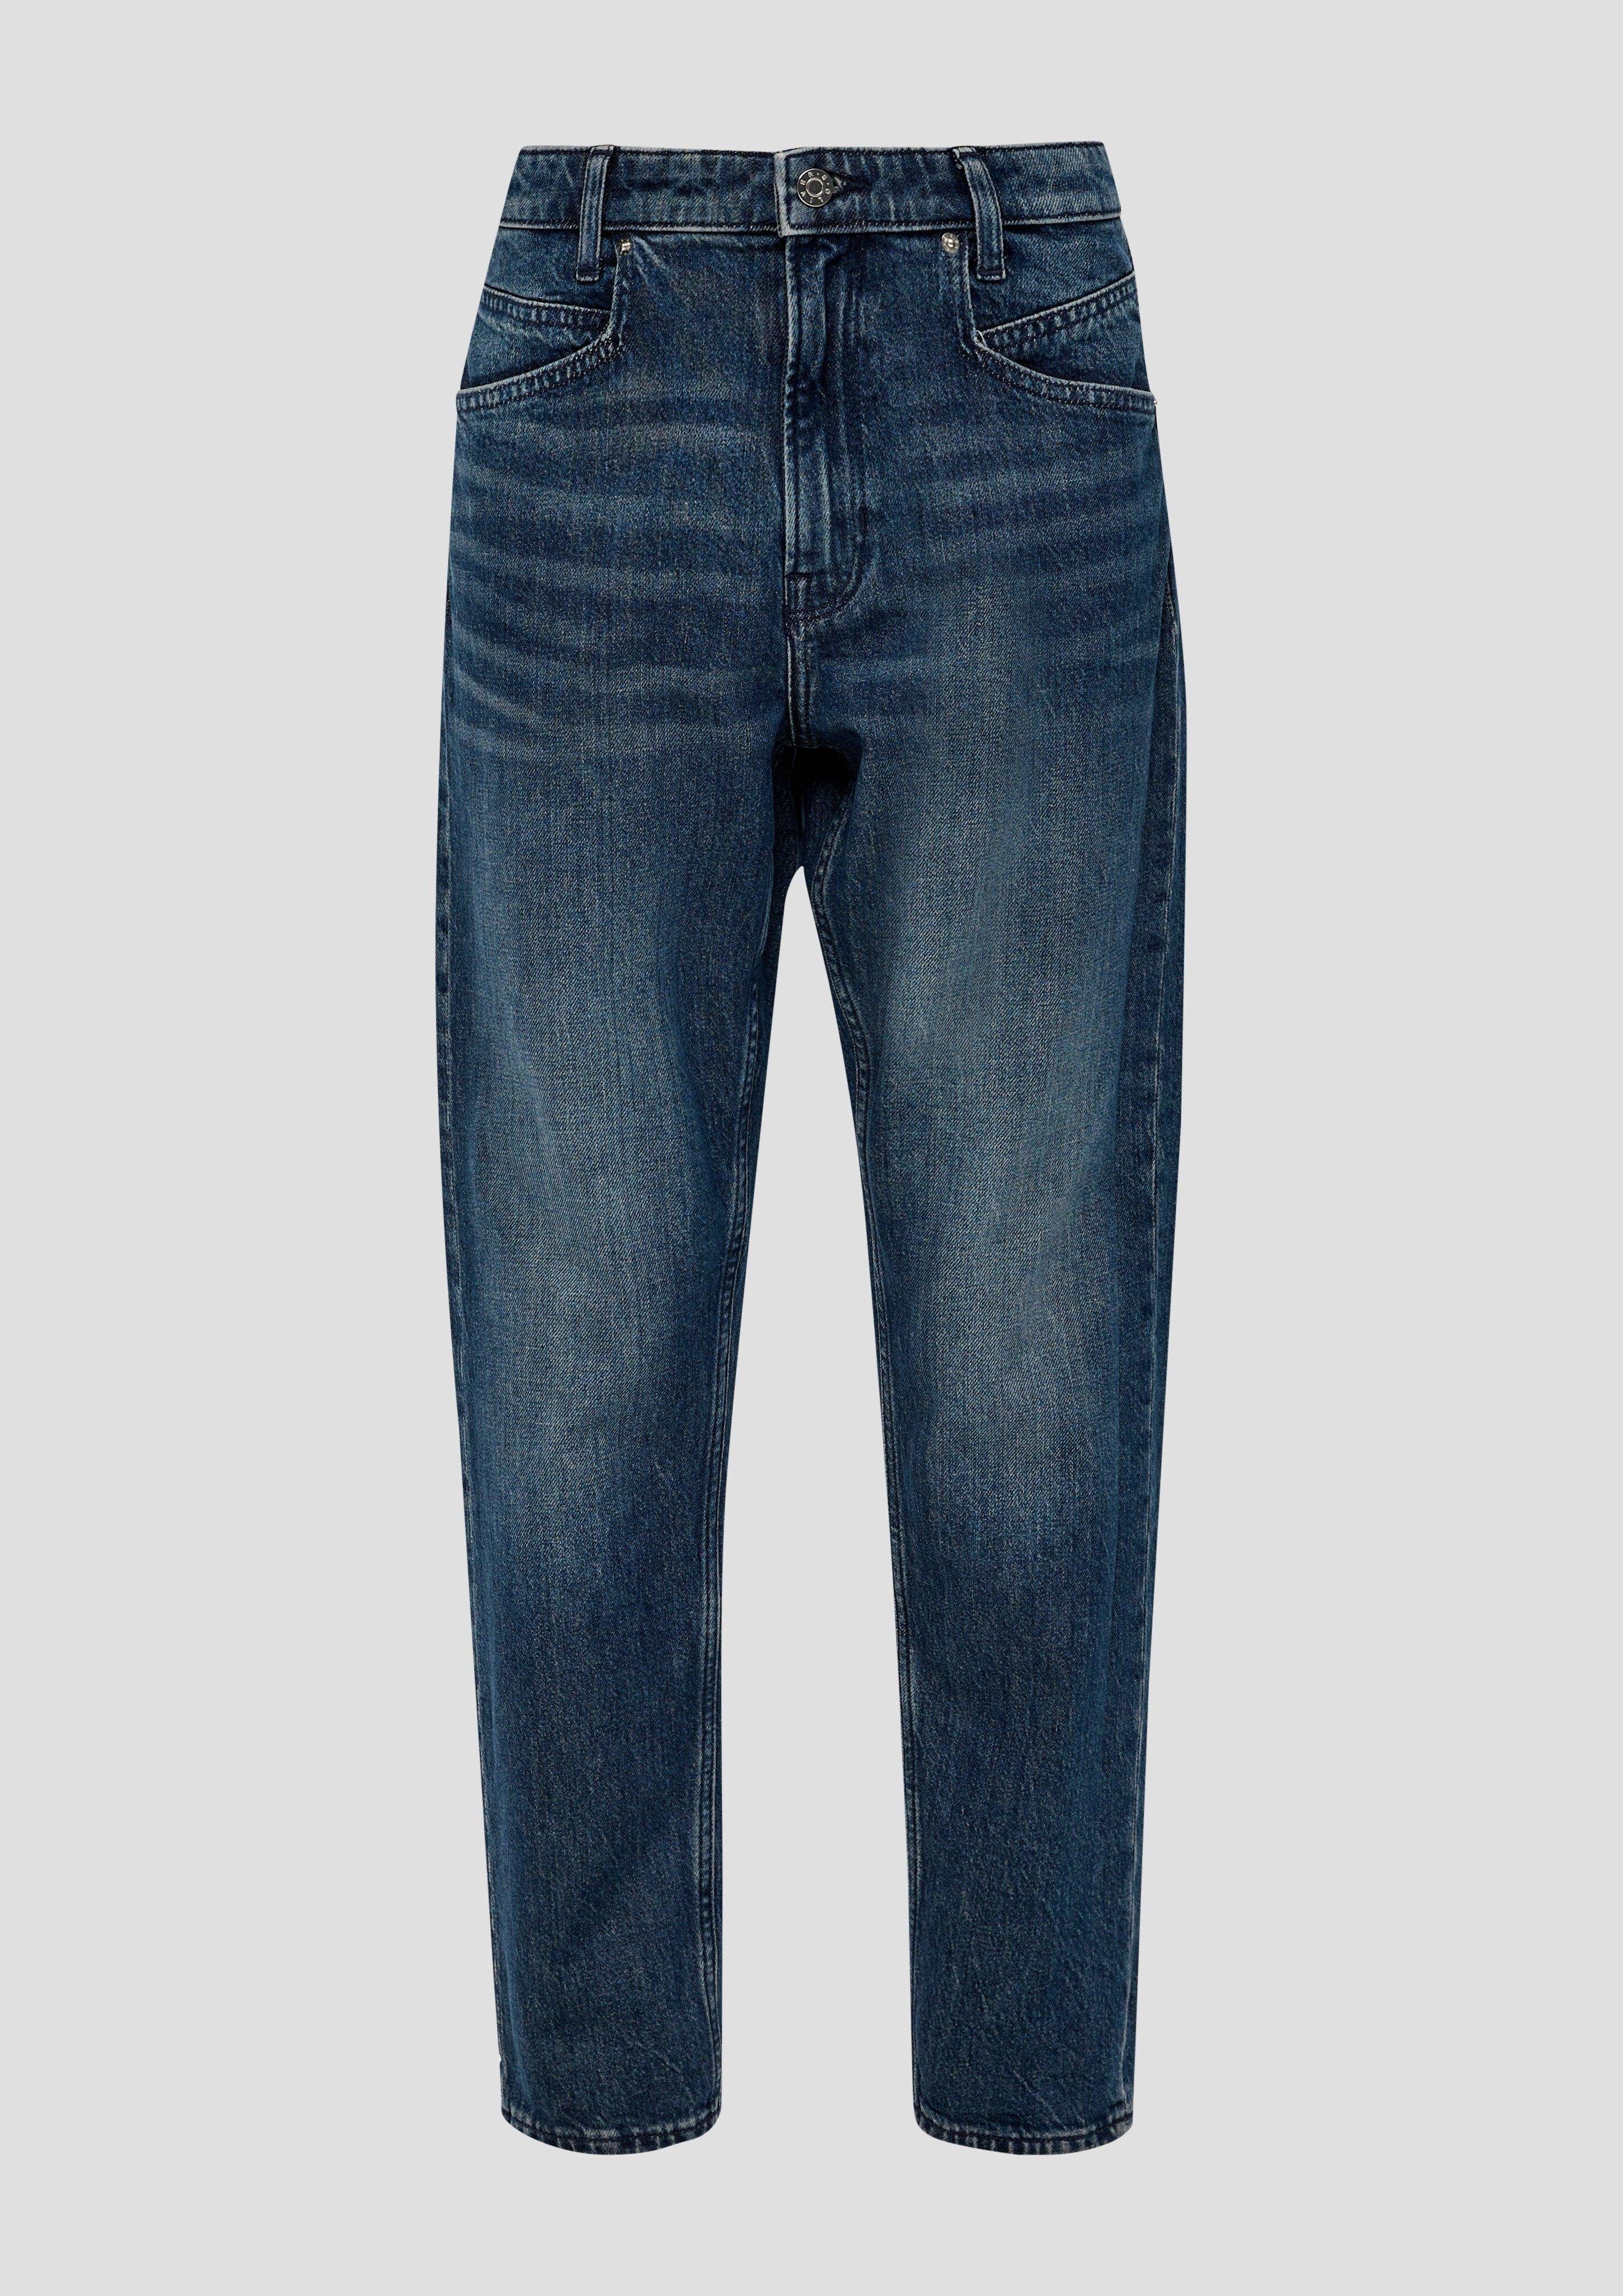 Rise Leg Mid / s.Oliver Franciz 7/8-Jeans Relaxed / Fit Tapered Ankle-Jeans Label-Patch / Waschung,